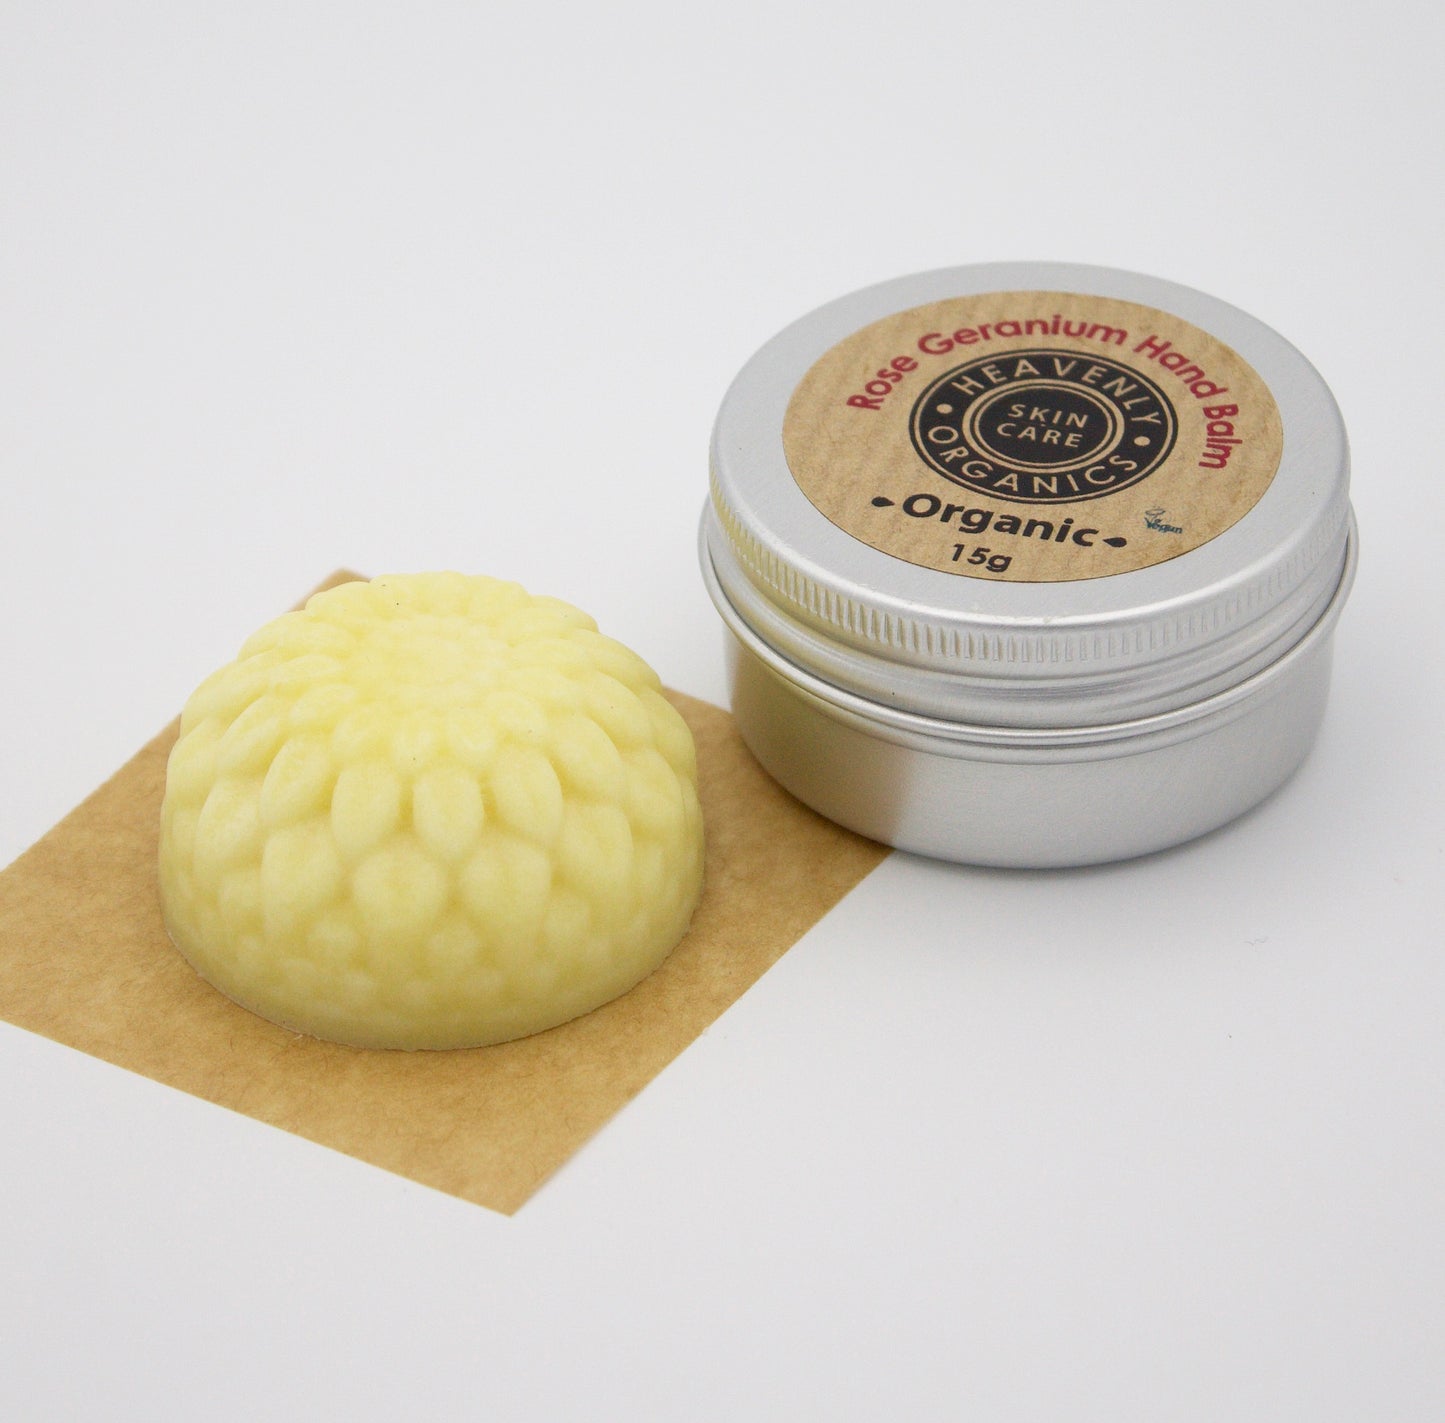 Organic Hand Balm from The Giving Box